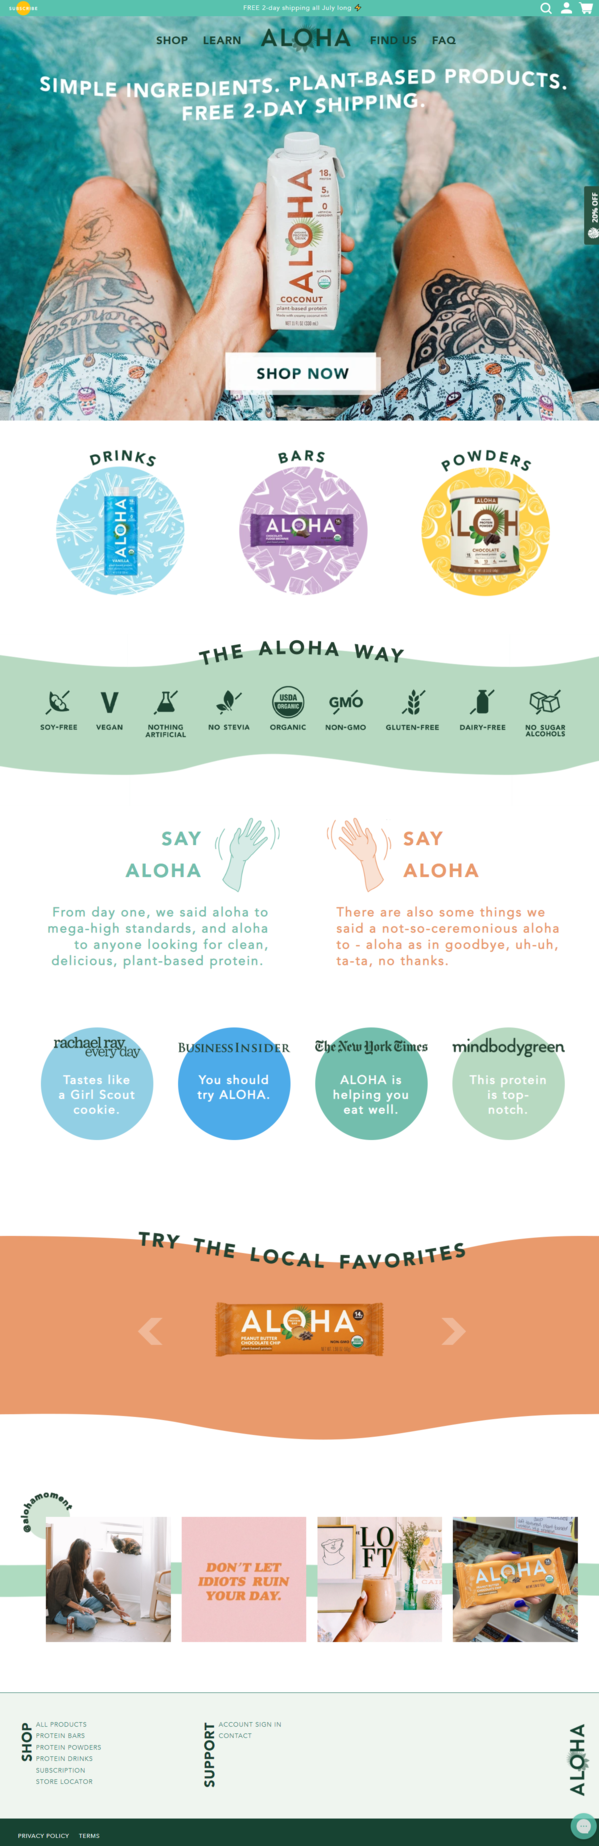 ALOHA - Organic plant-based protein products   nothing artificial - Aloha.png